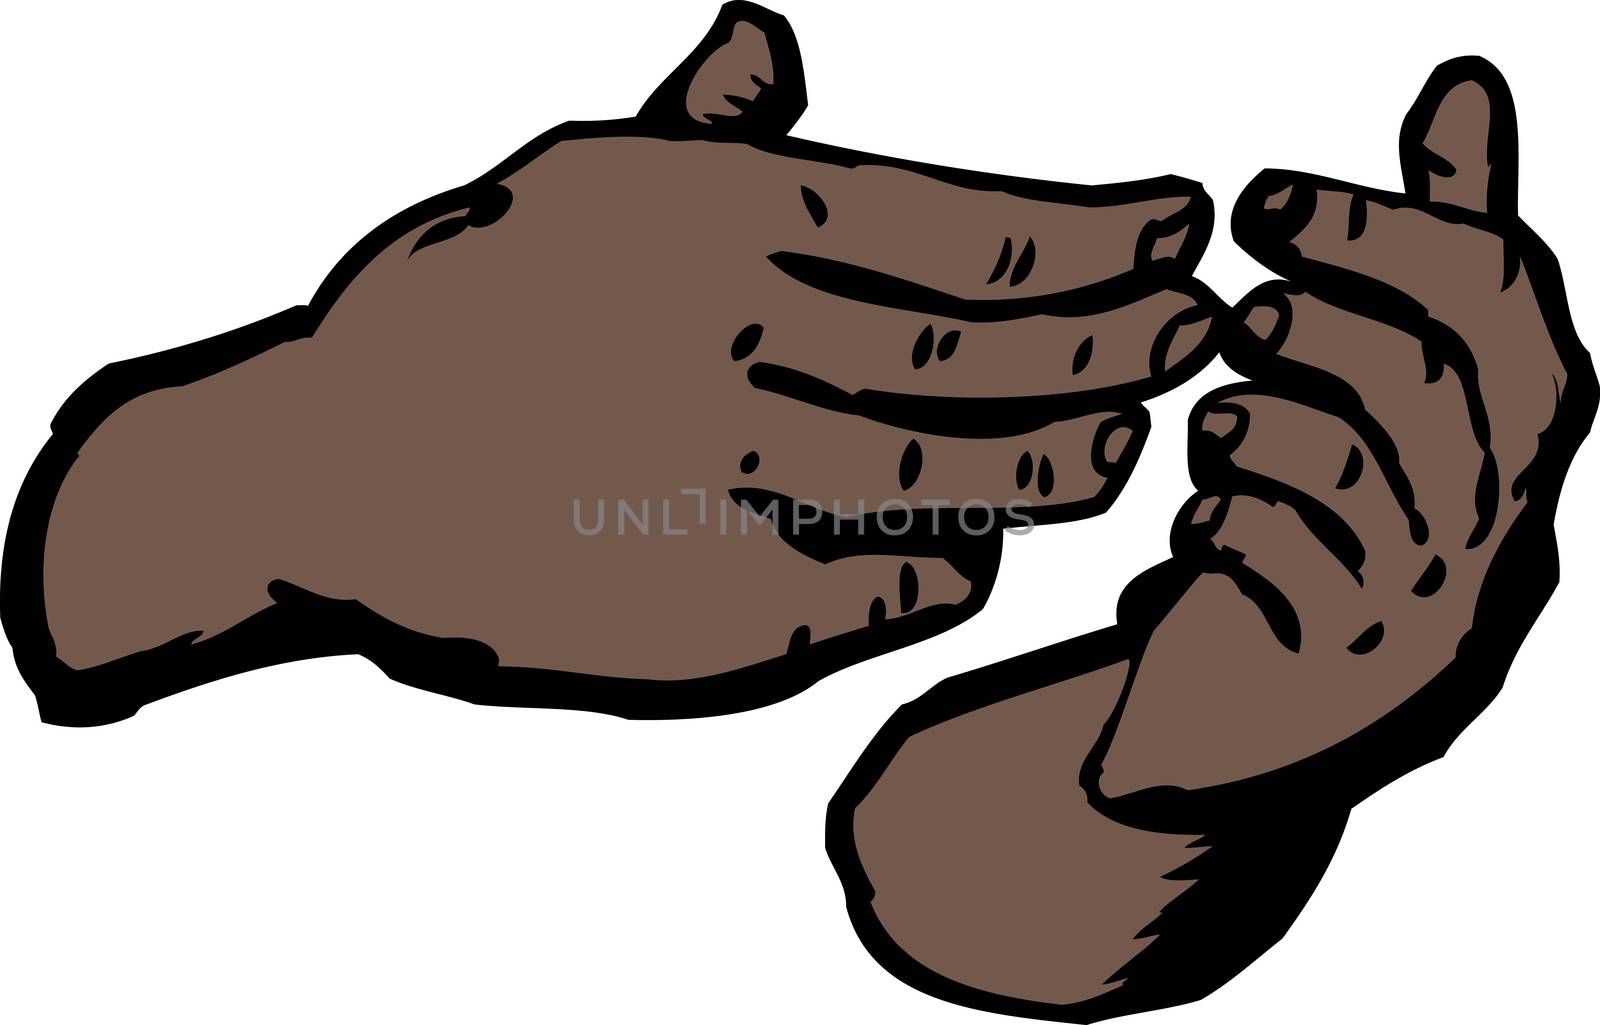 Empty hands holding something over white background